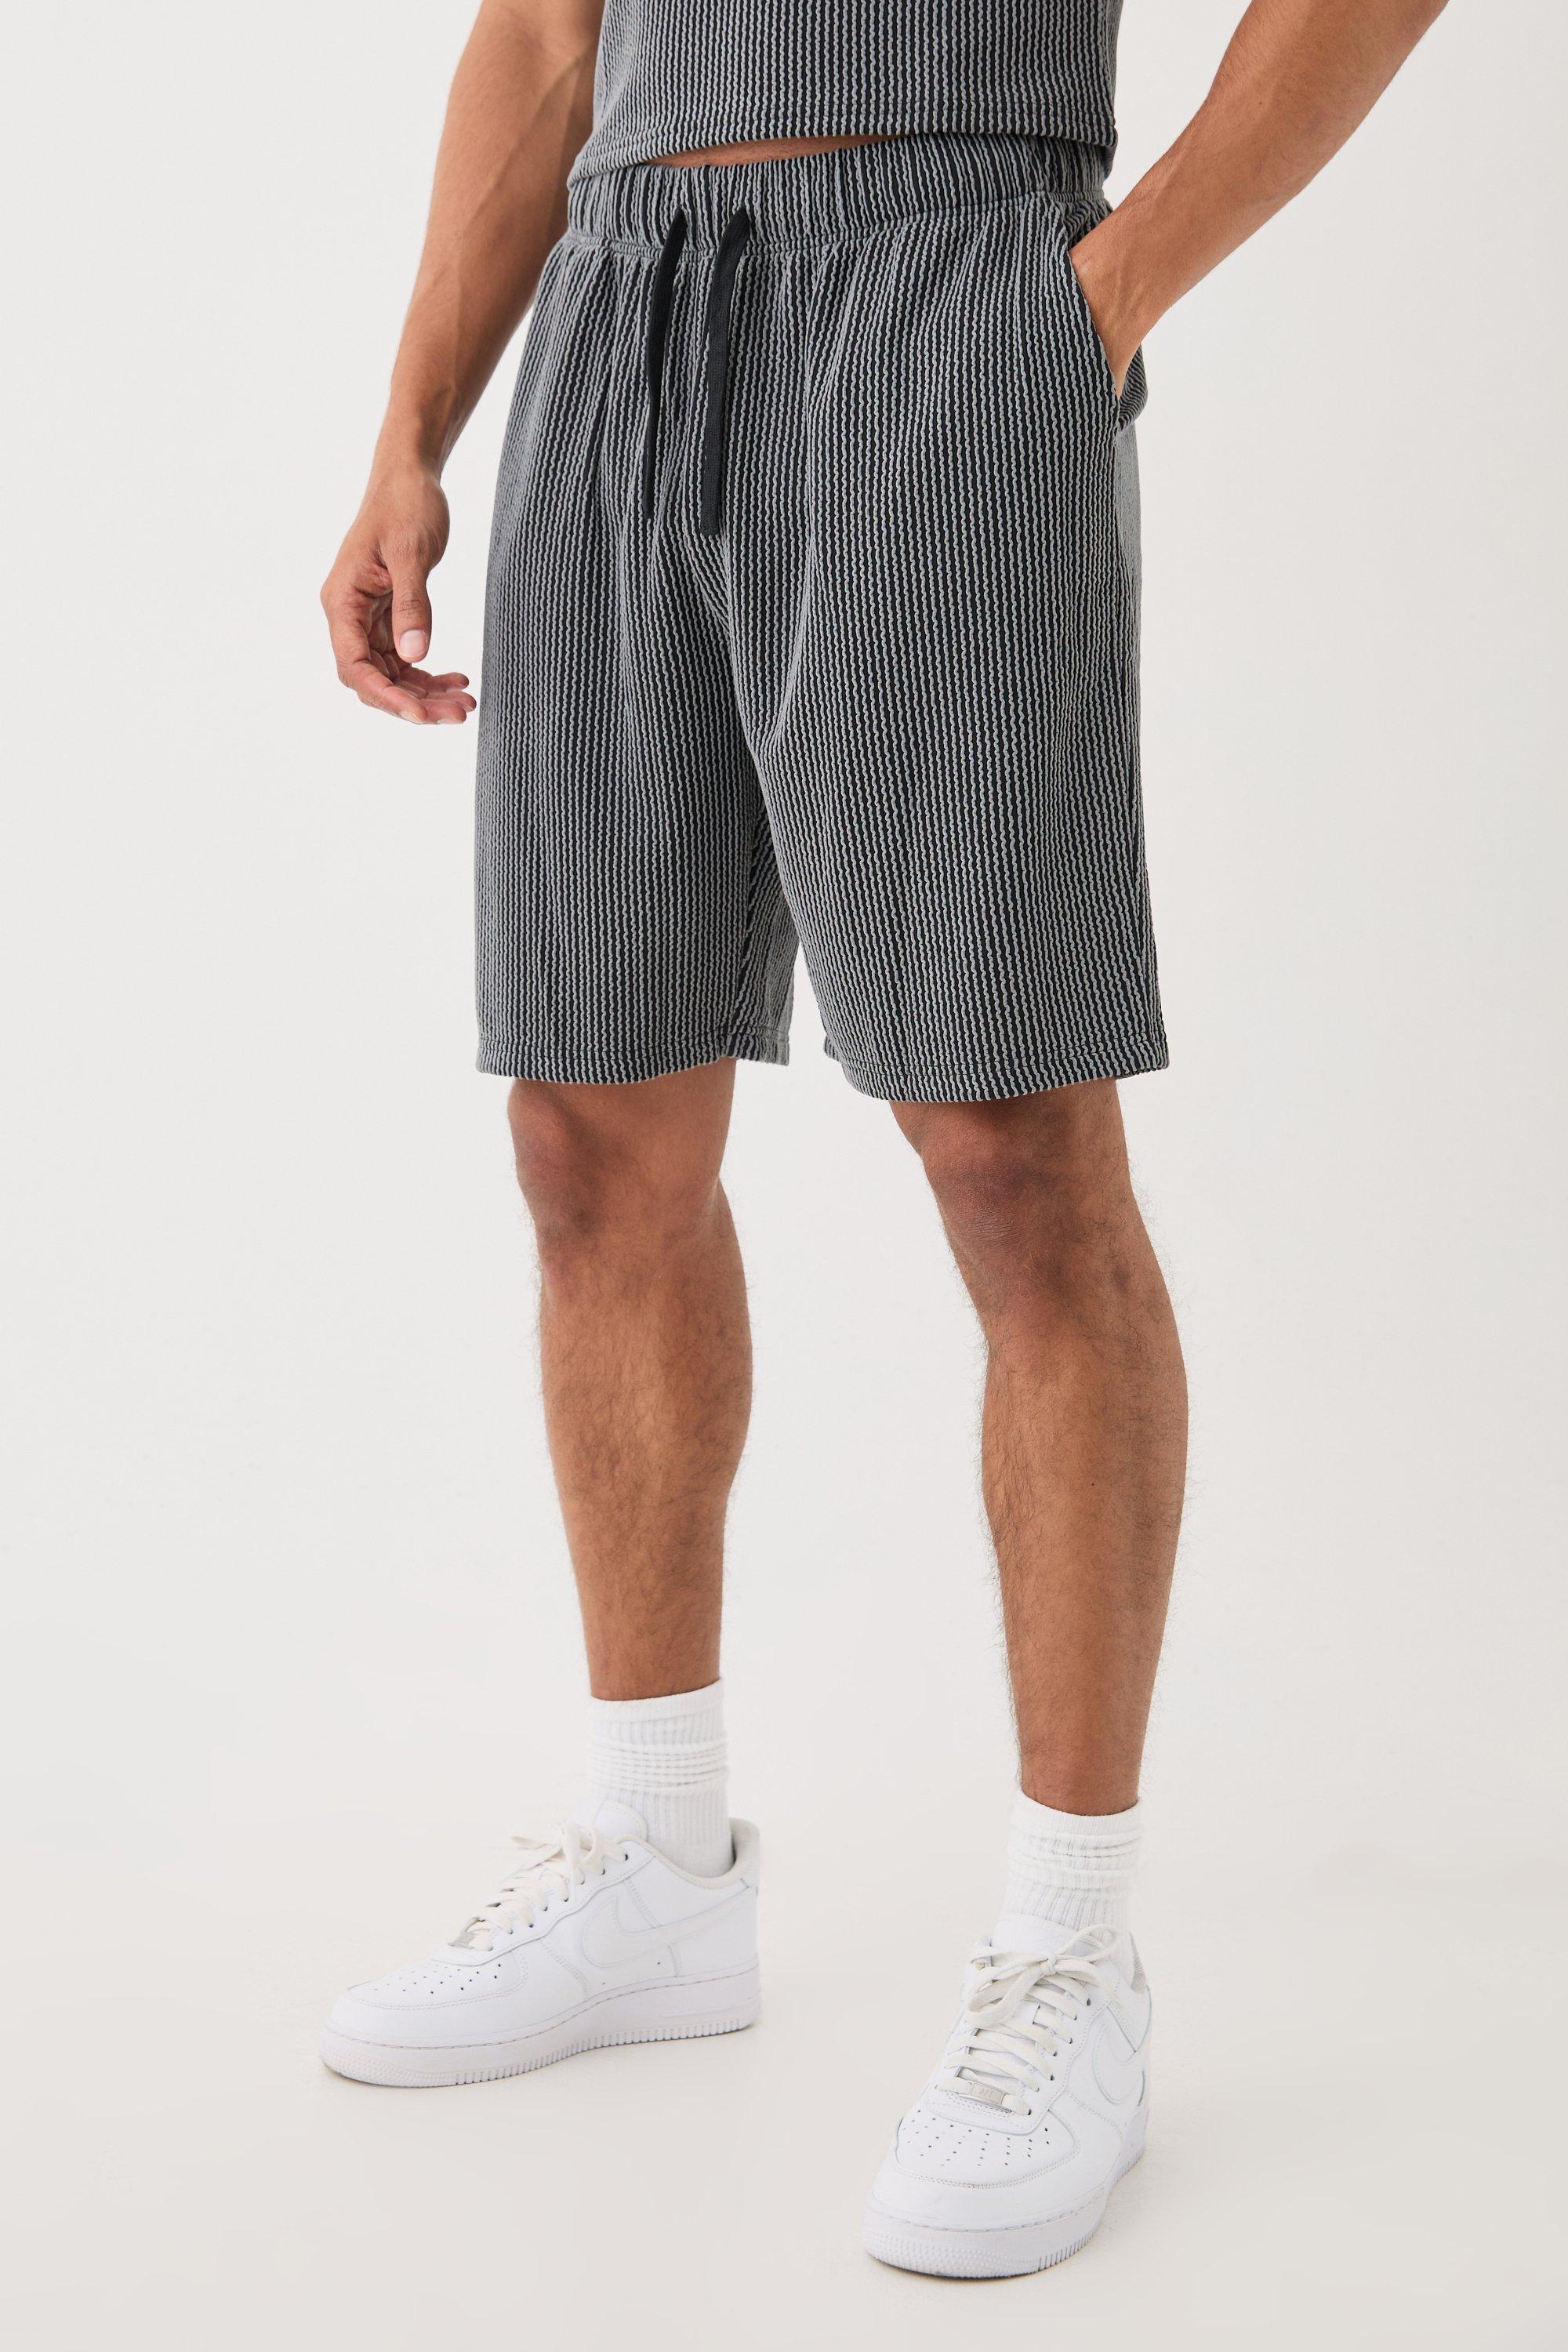 Image of Relaxed Fit Mid Length Stripe Texture Shorts, Nero